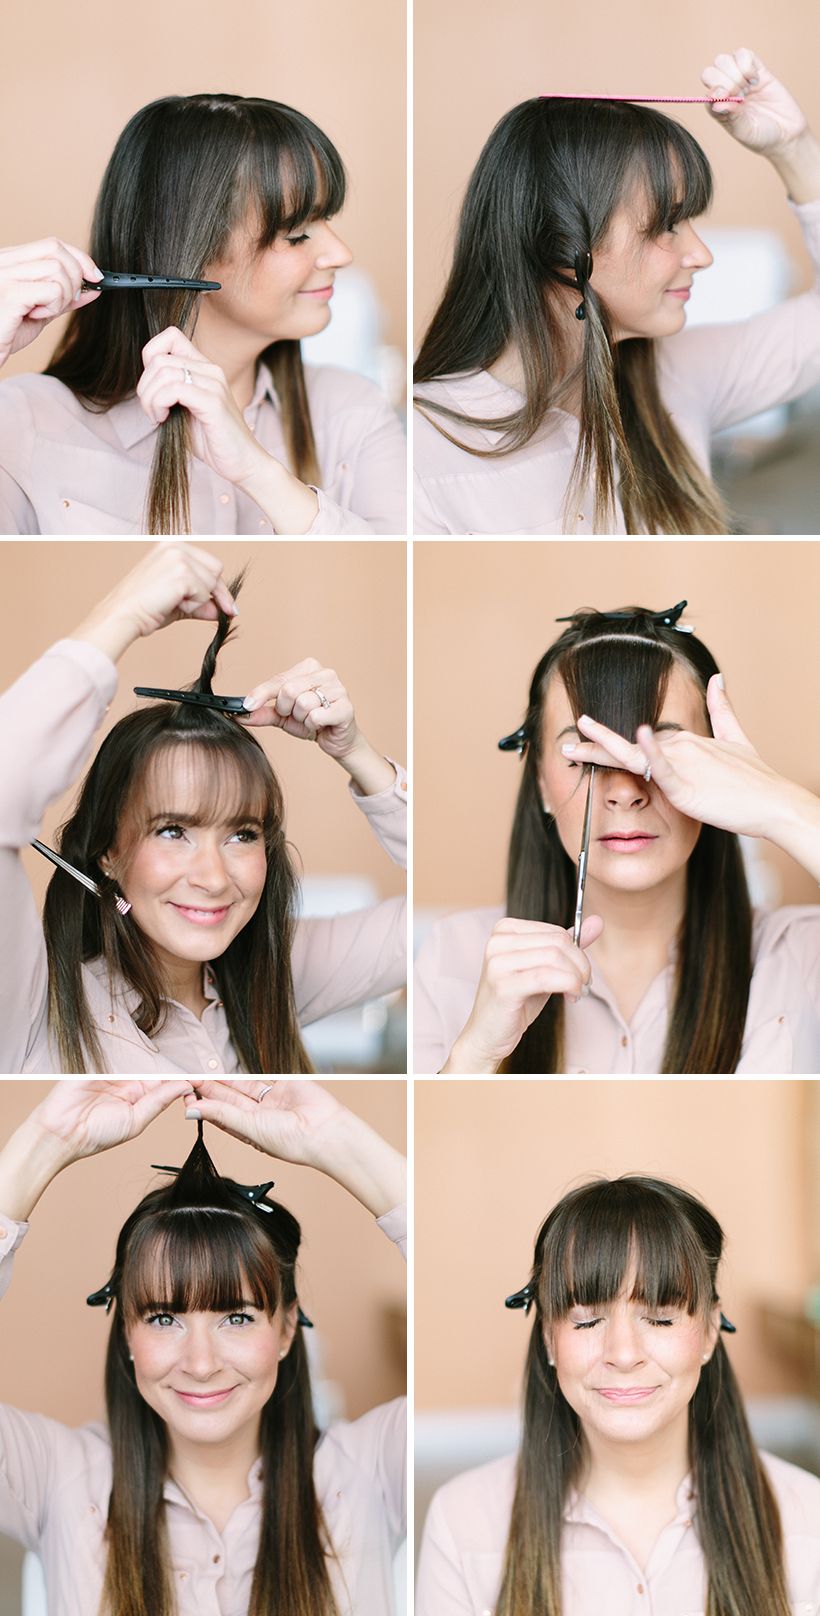 How to Cut Your Bangs at Home